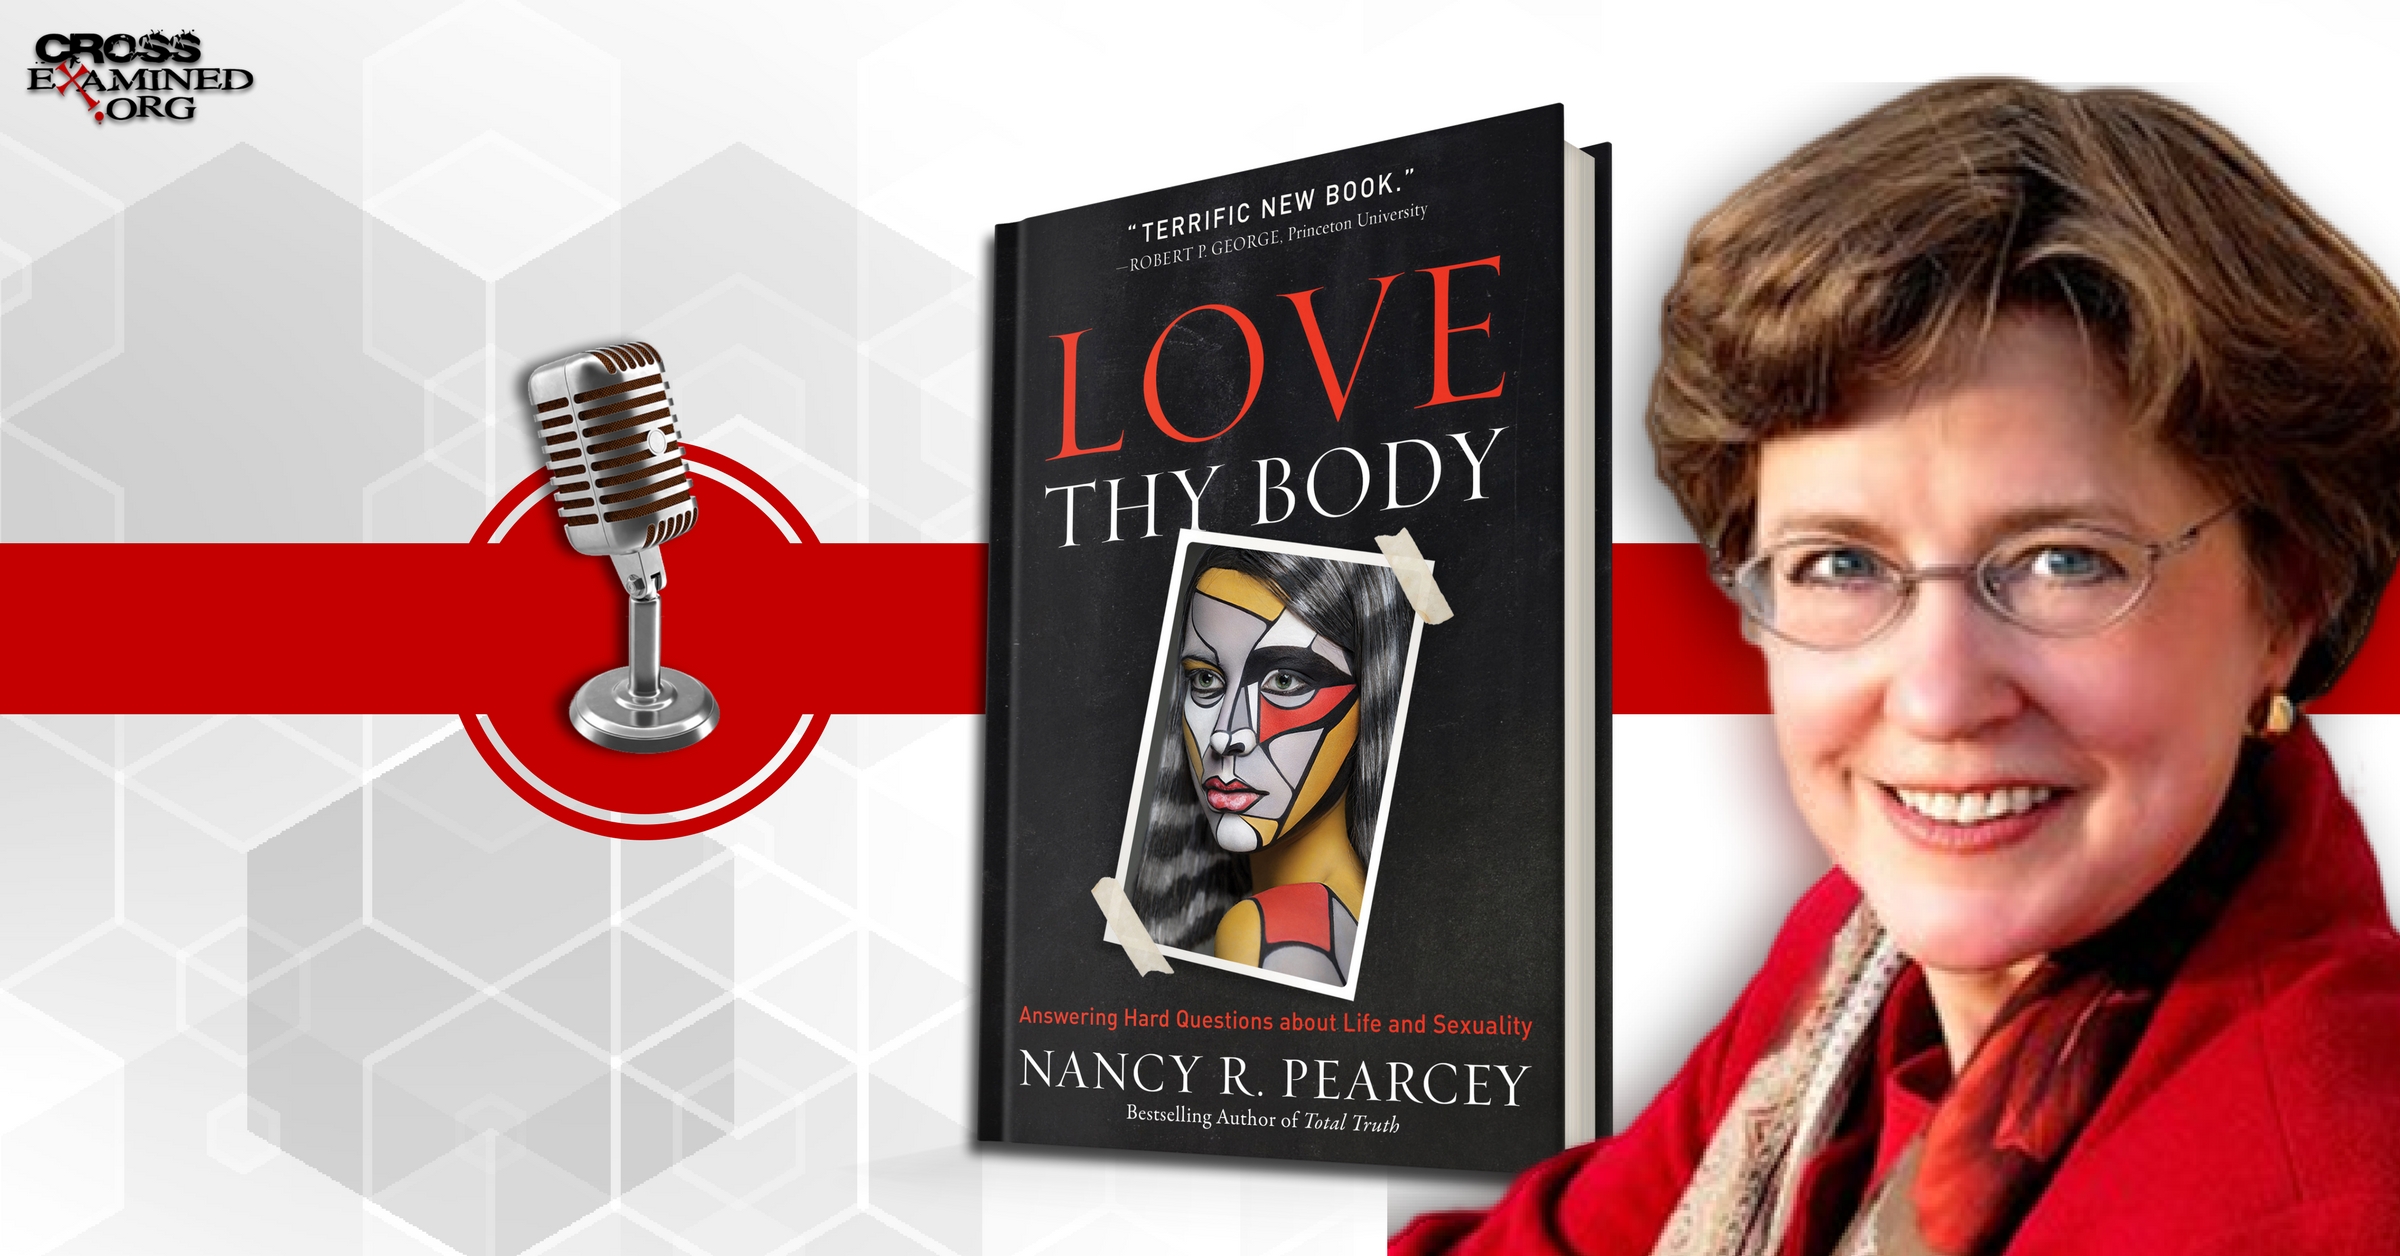 Love Thy Body: Answering Hard Questions about Life and Sexuality w/ Nancy Pearcey